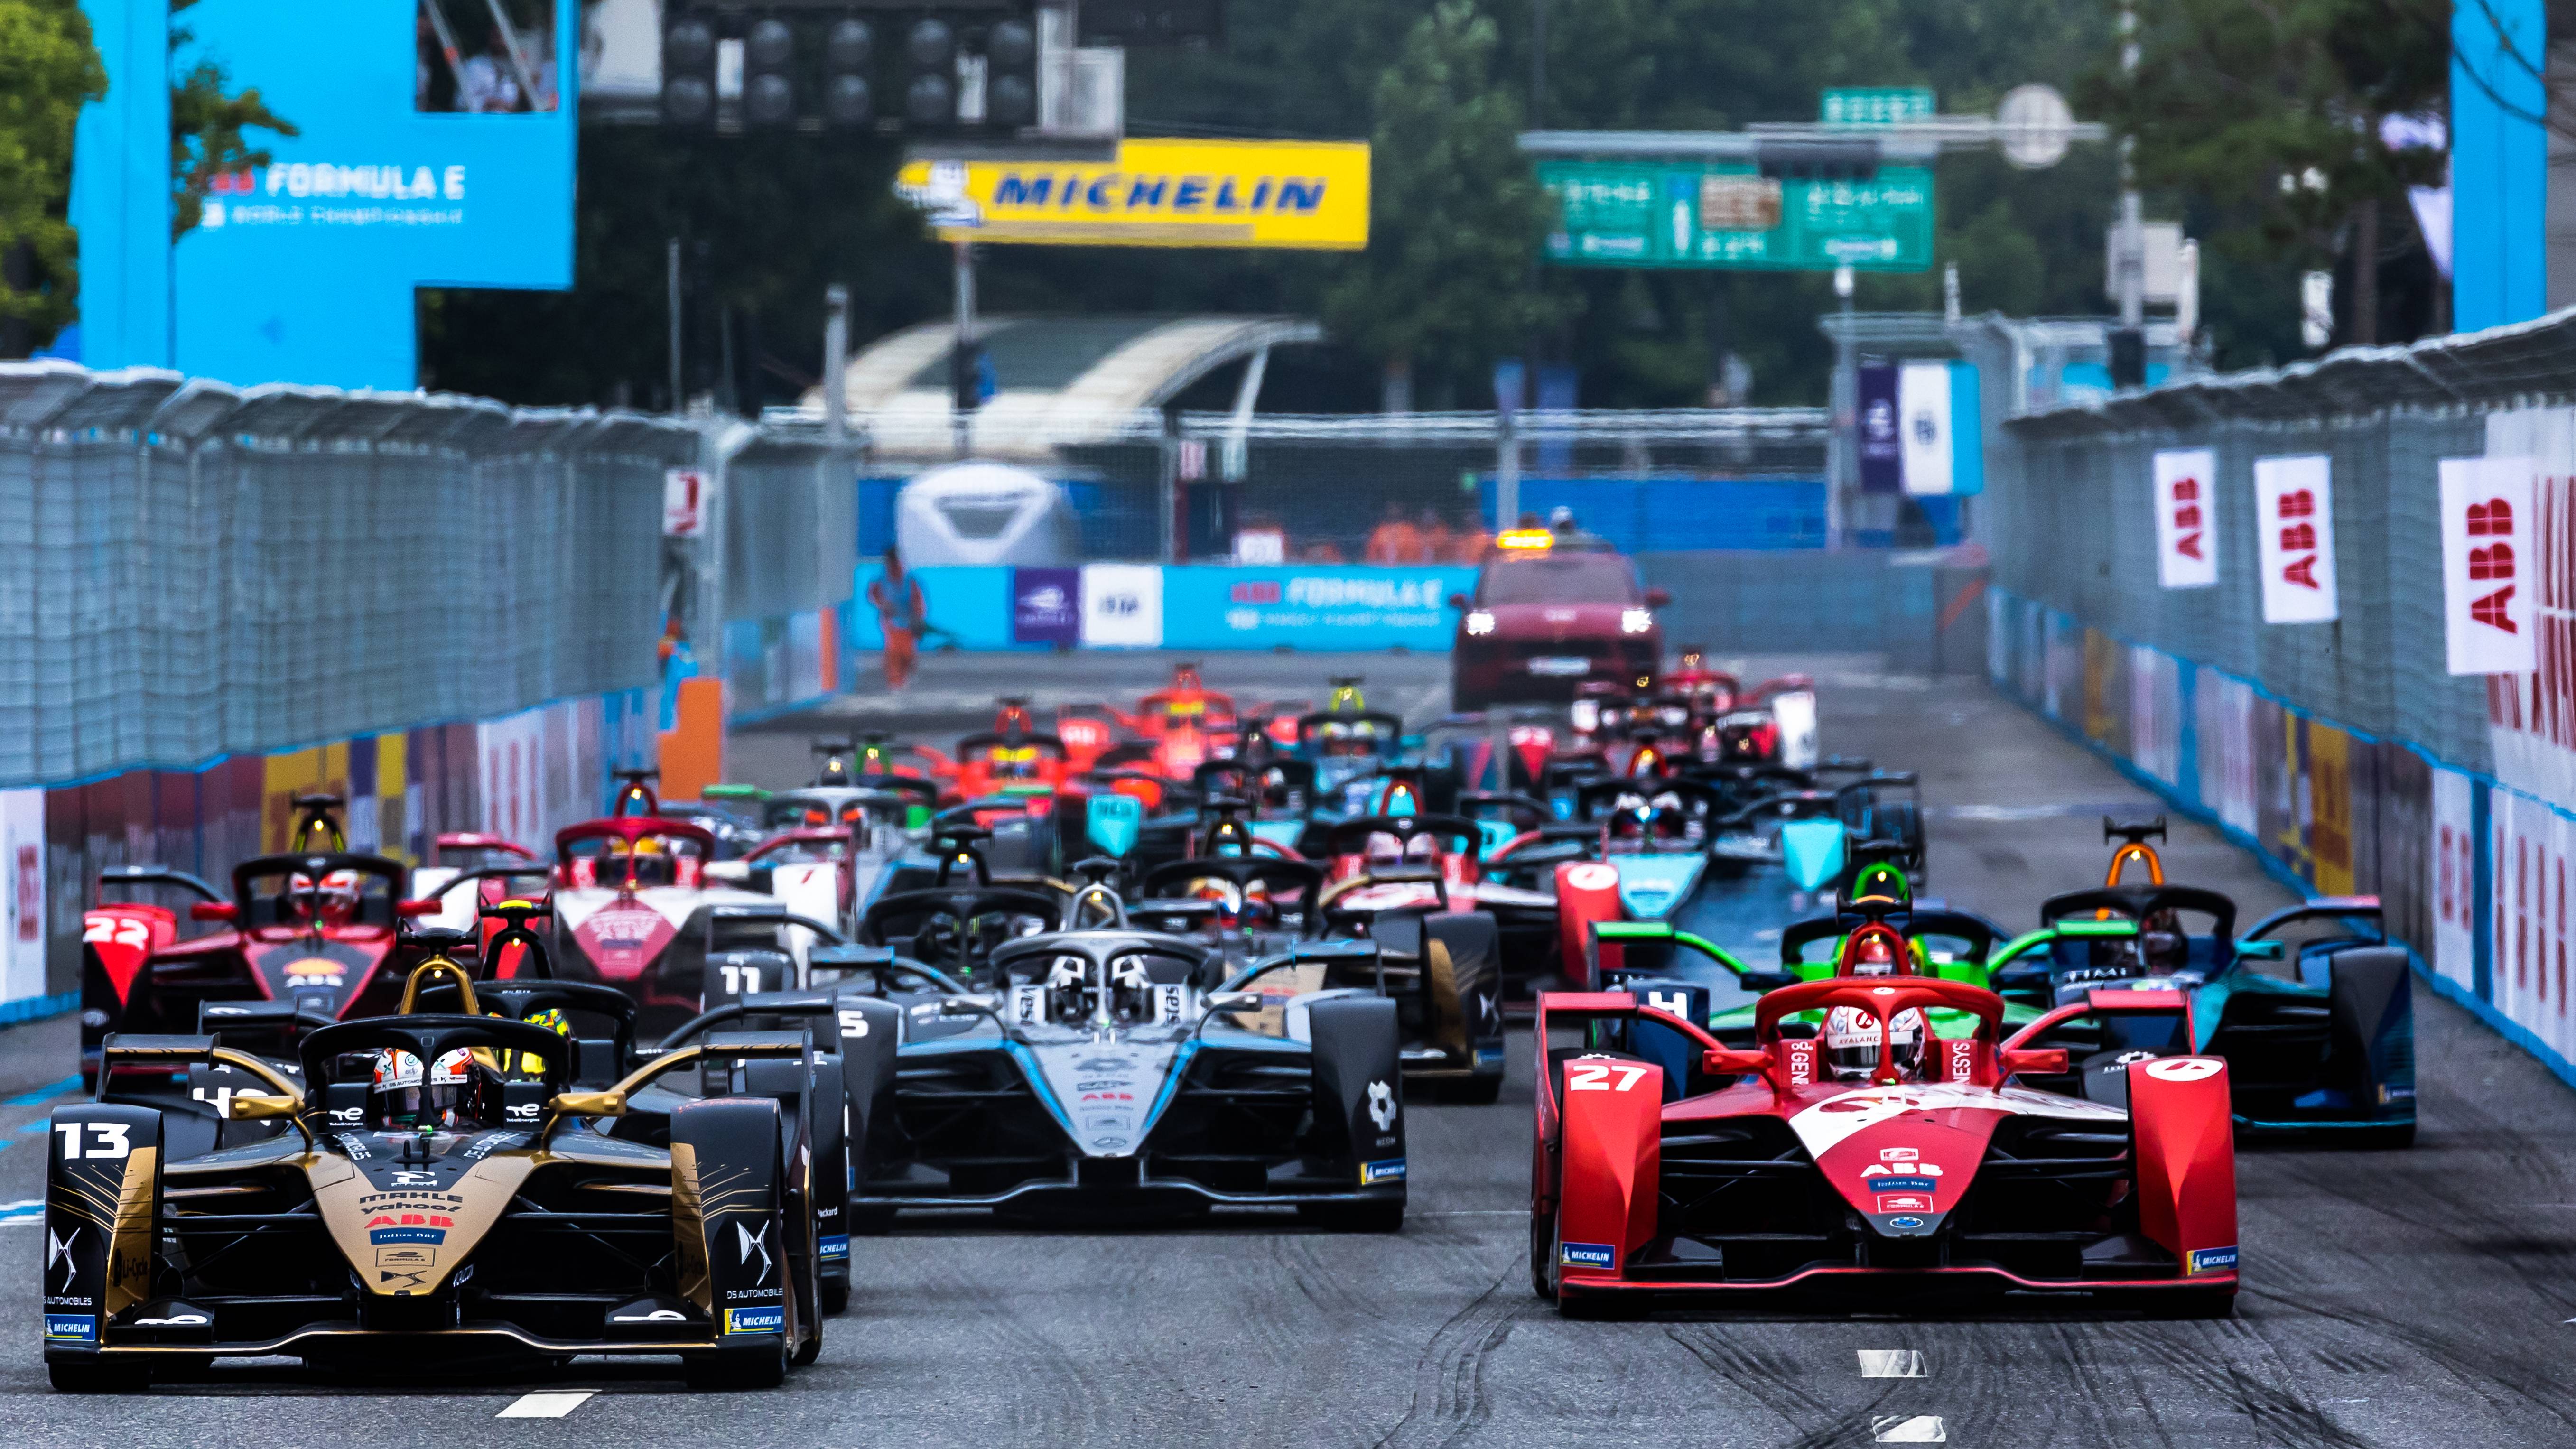 How to watch Formula E online: live stream every race | What to Watch